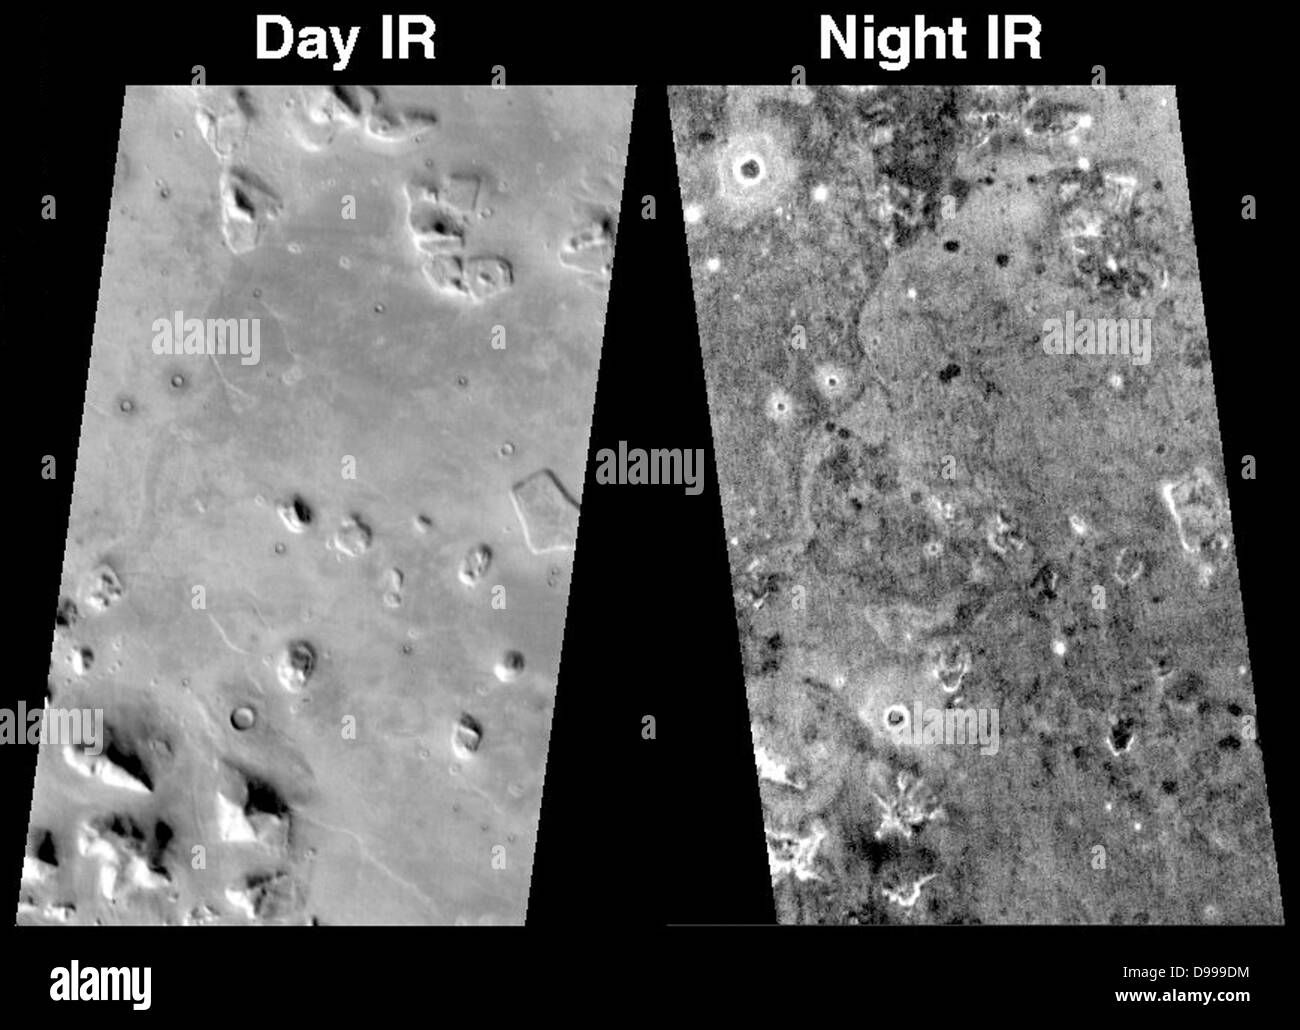 This pair of THEMIS infrared images shows the so-called 'face on Mars' landform viewed during both the day and night. Stock Photo